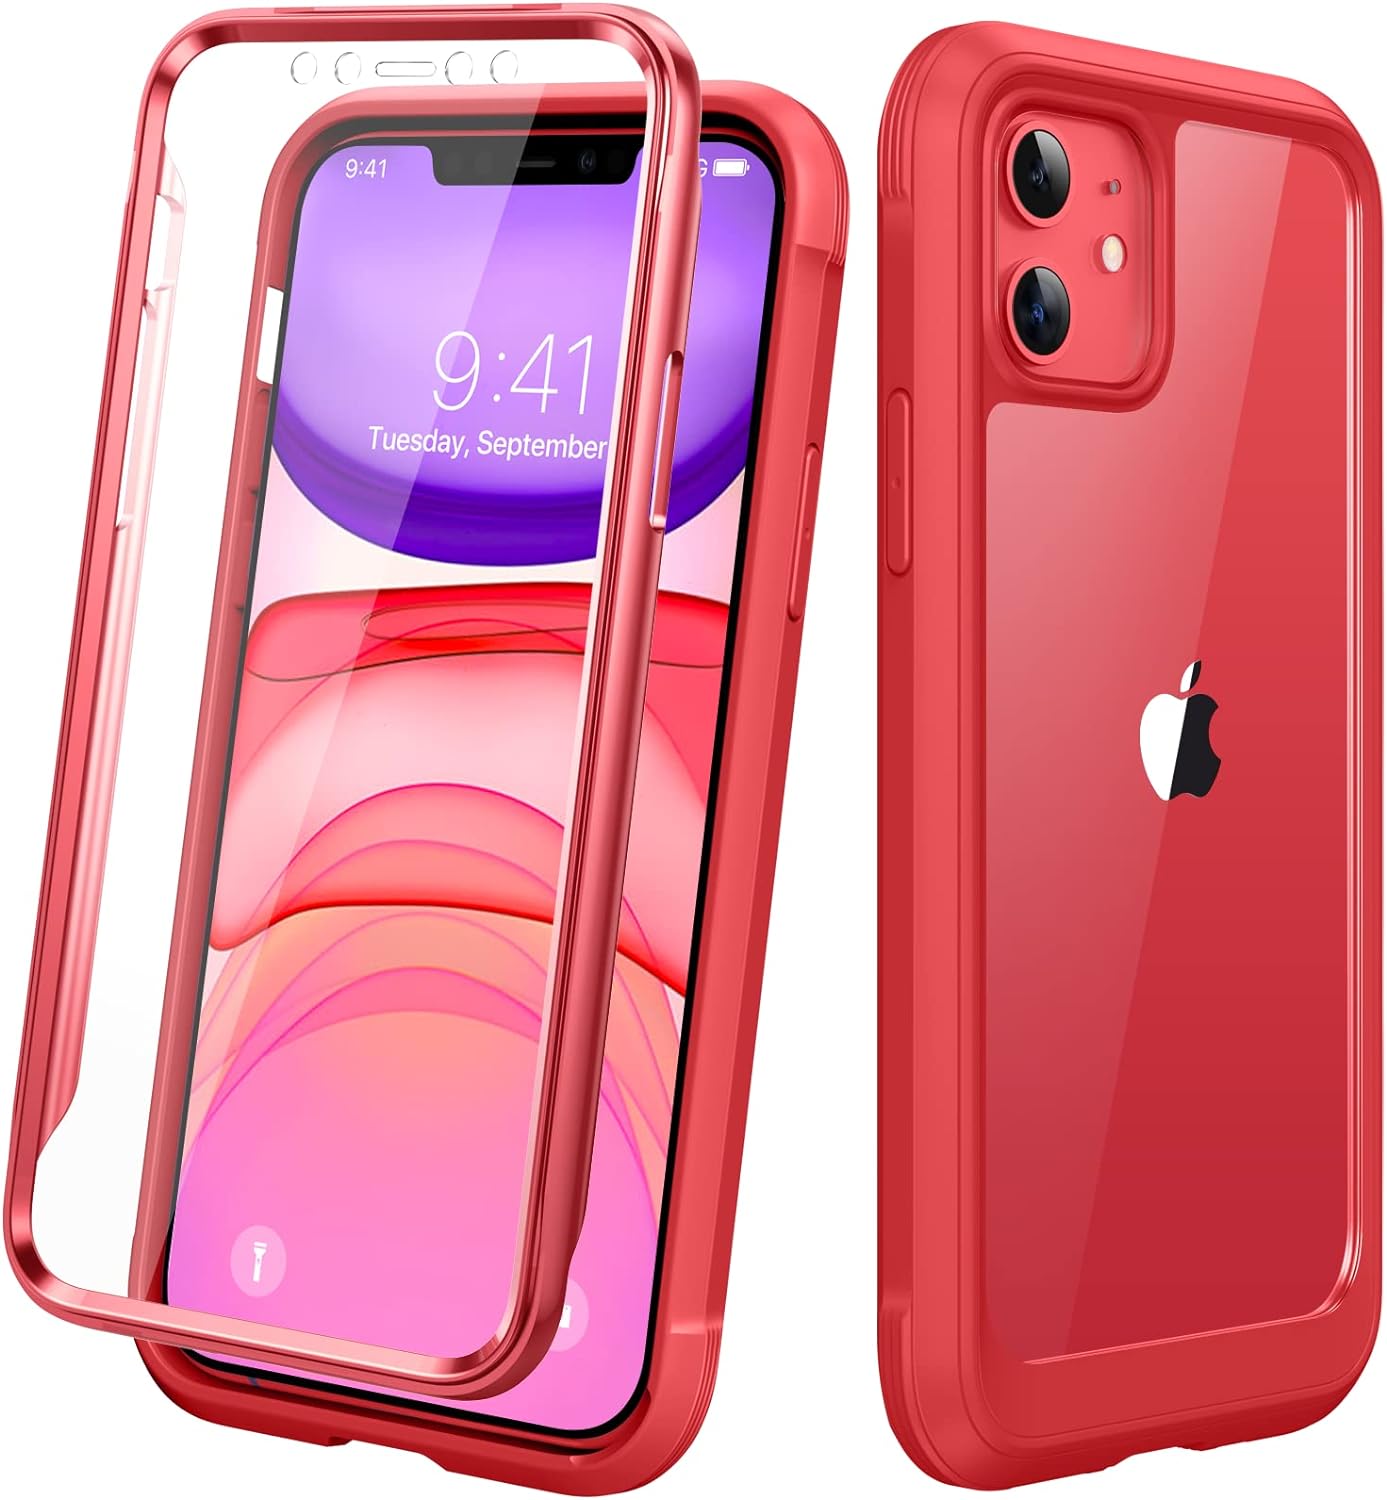 with iPhone 11 Case, Full Body Rugged Case with Built-in Touch Sensitive Anti-Scratch Screen Protector, Soft TPU Bumper Case Clear Compatible with iPhone 11 6.1" (Purple and Clear)